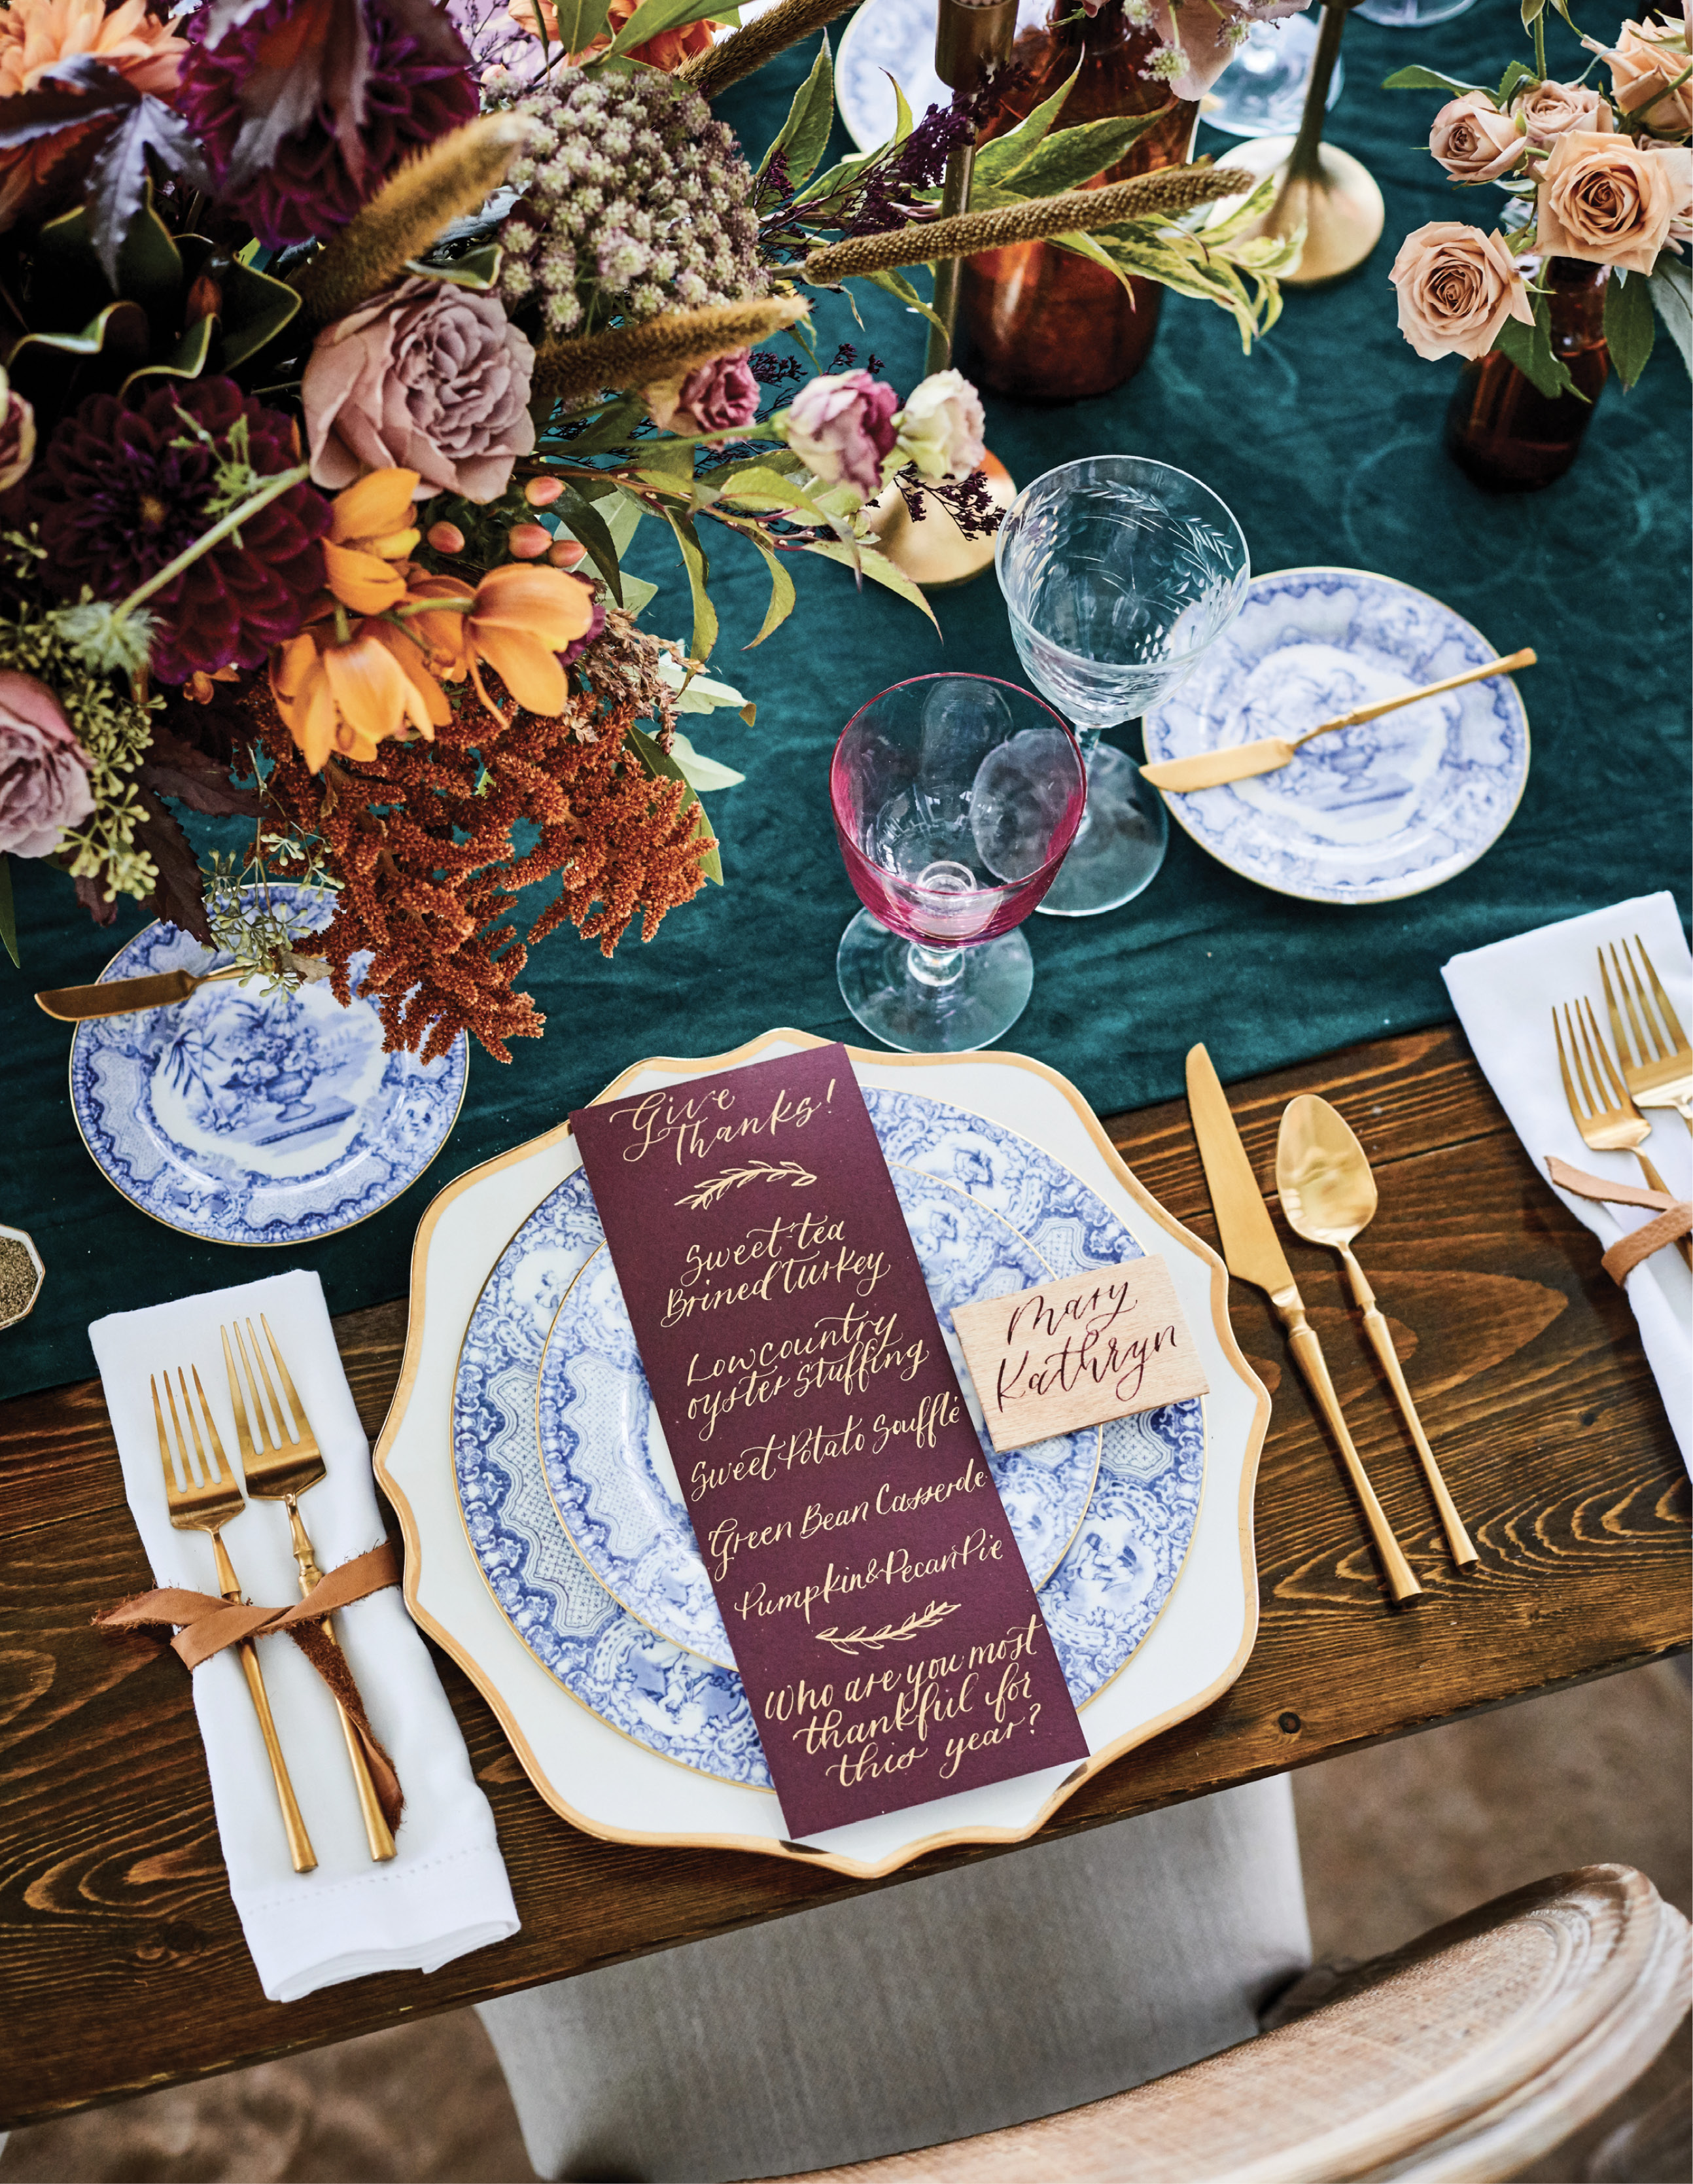 For her tablescapes, Lisa loves to mix it up, combining classic and modern, fancy and casual, such as antique china on a trendy gold-rim charger.